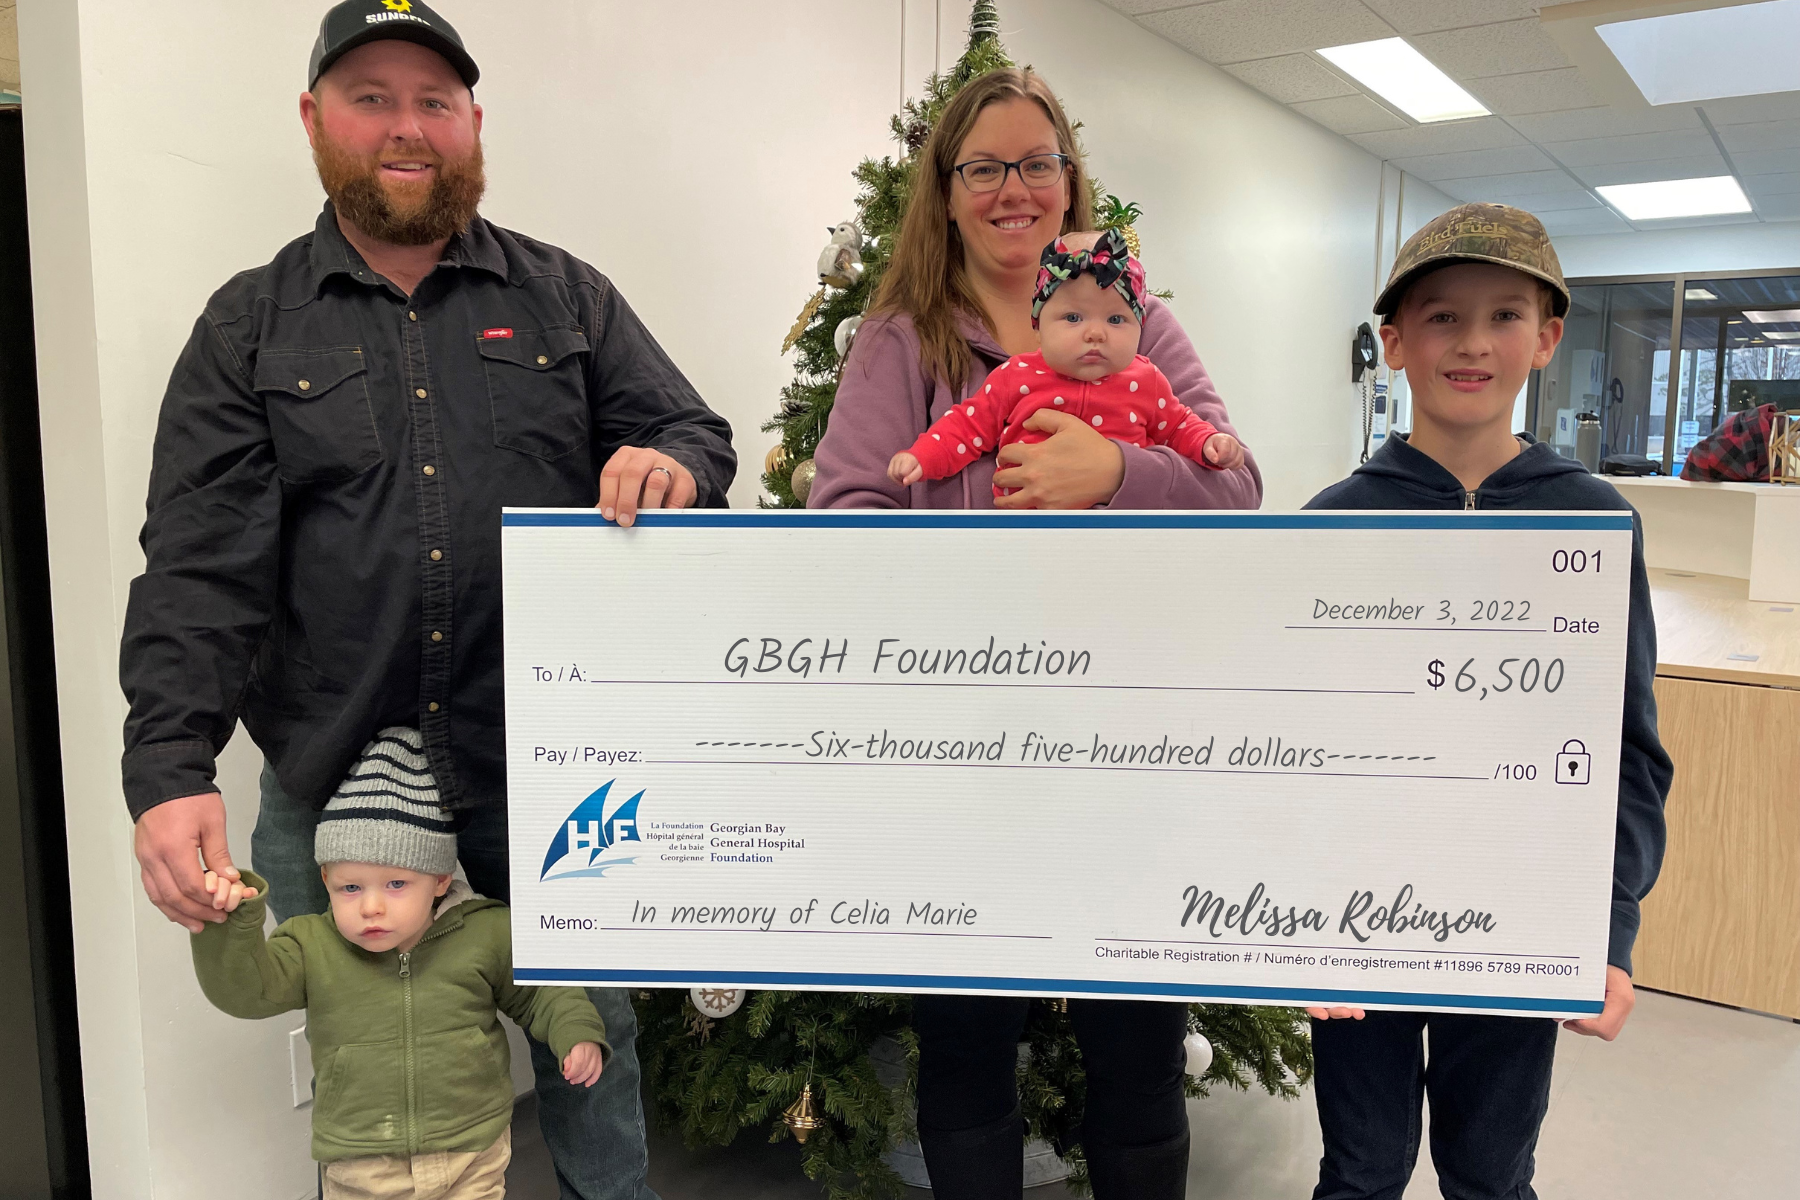 A man, a women, a young boy, a toddle and a baby stand with a giant cheque for $6,500 to the GBGH Foundation in memory of Celia Marie